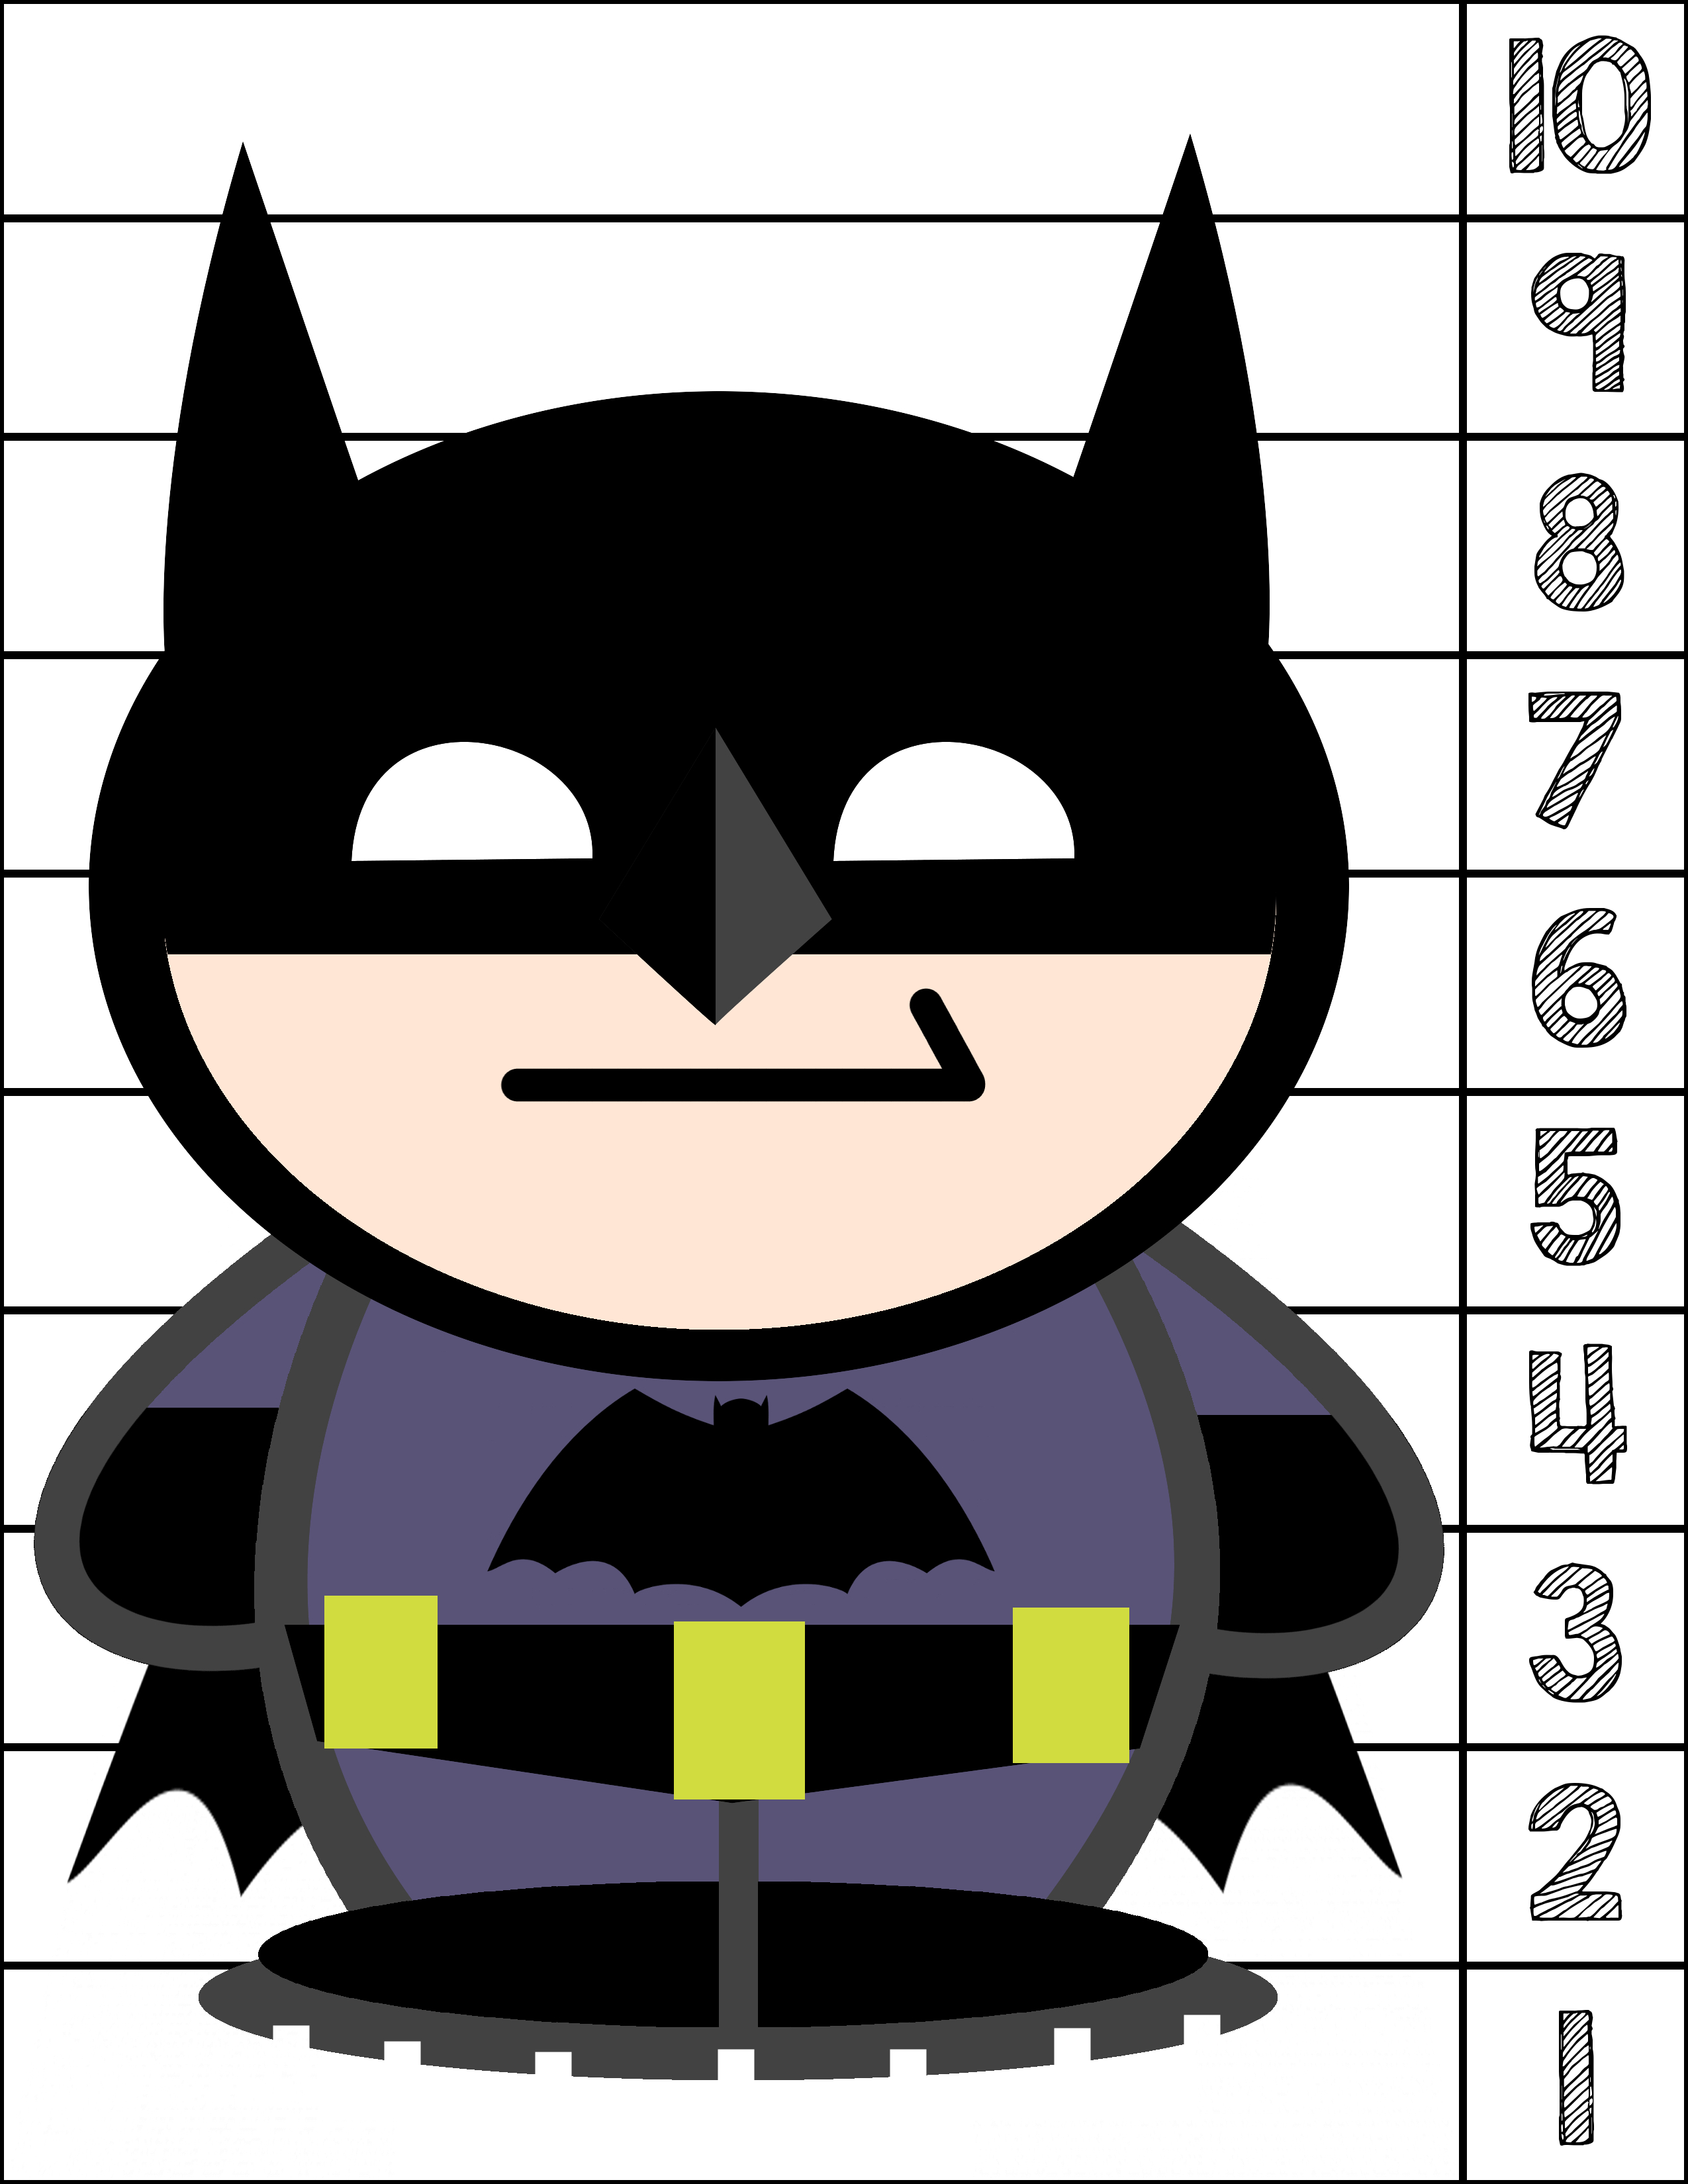 Batman #1-10 Counting Puzzle | Prekautism | Counting Puzzles - Printable Number Puzzles 1-10